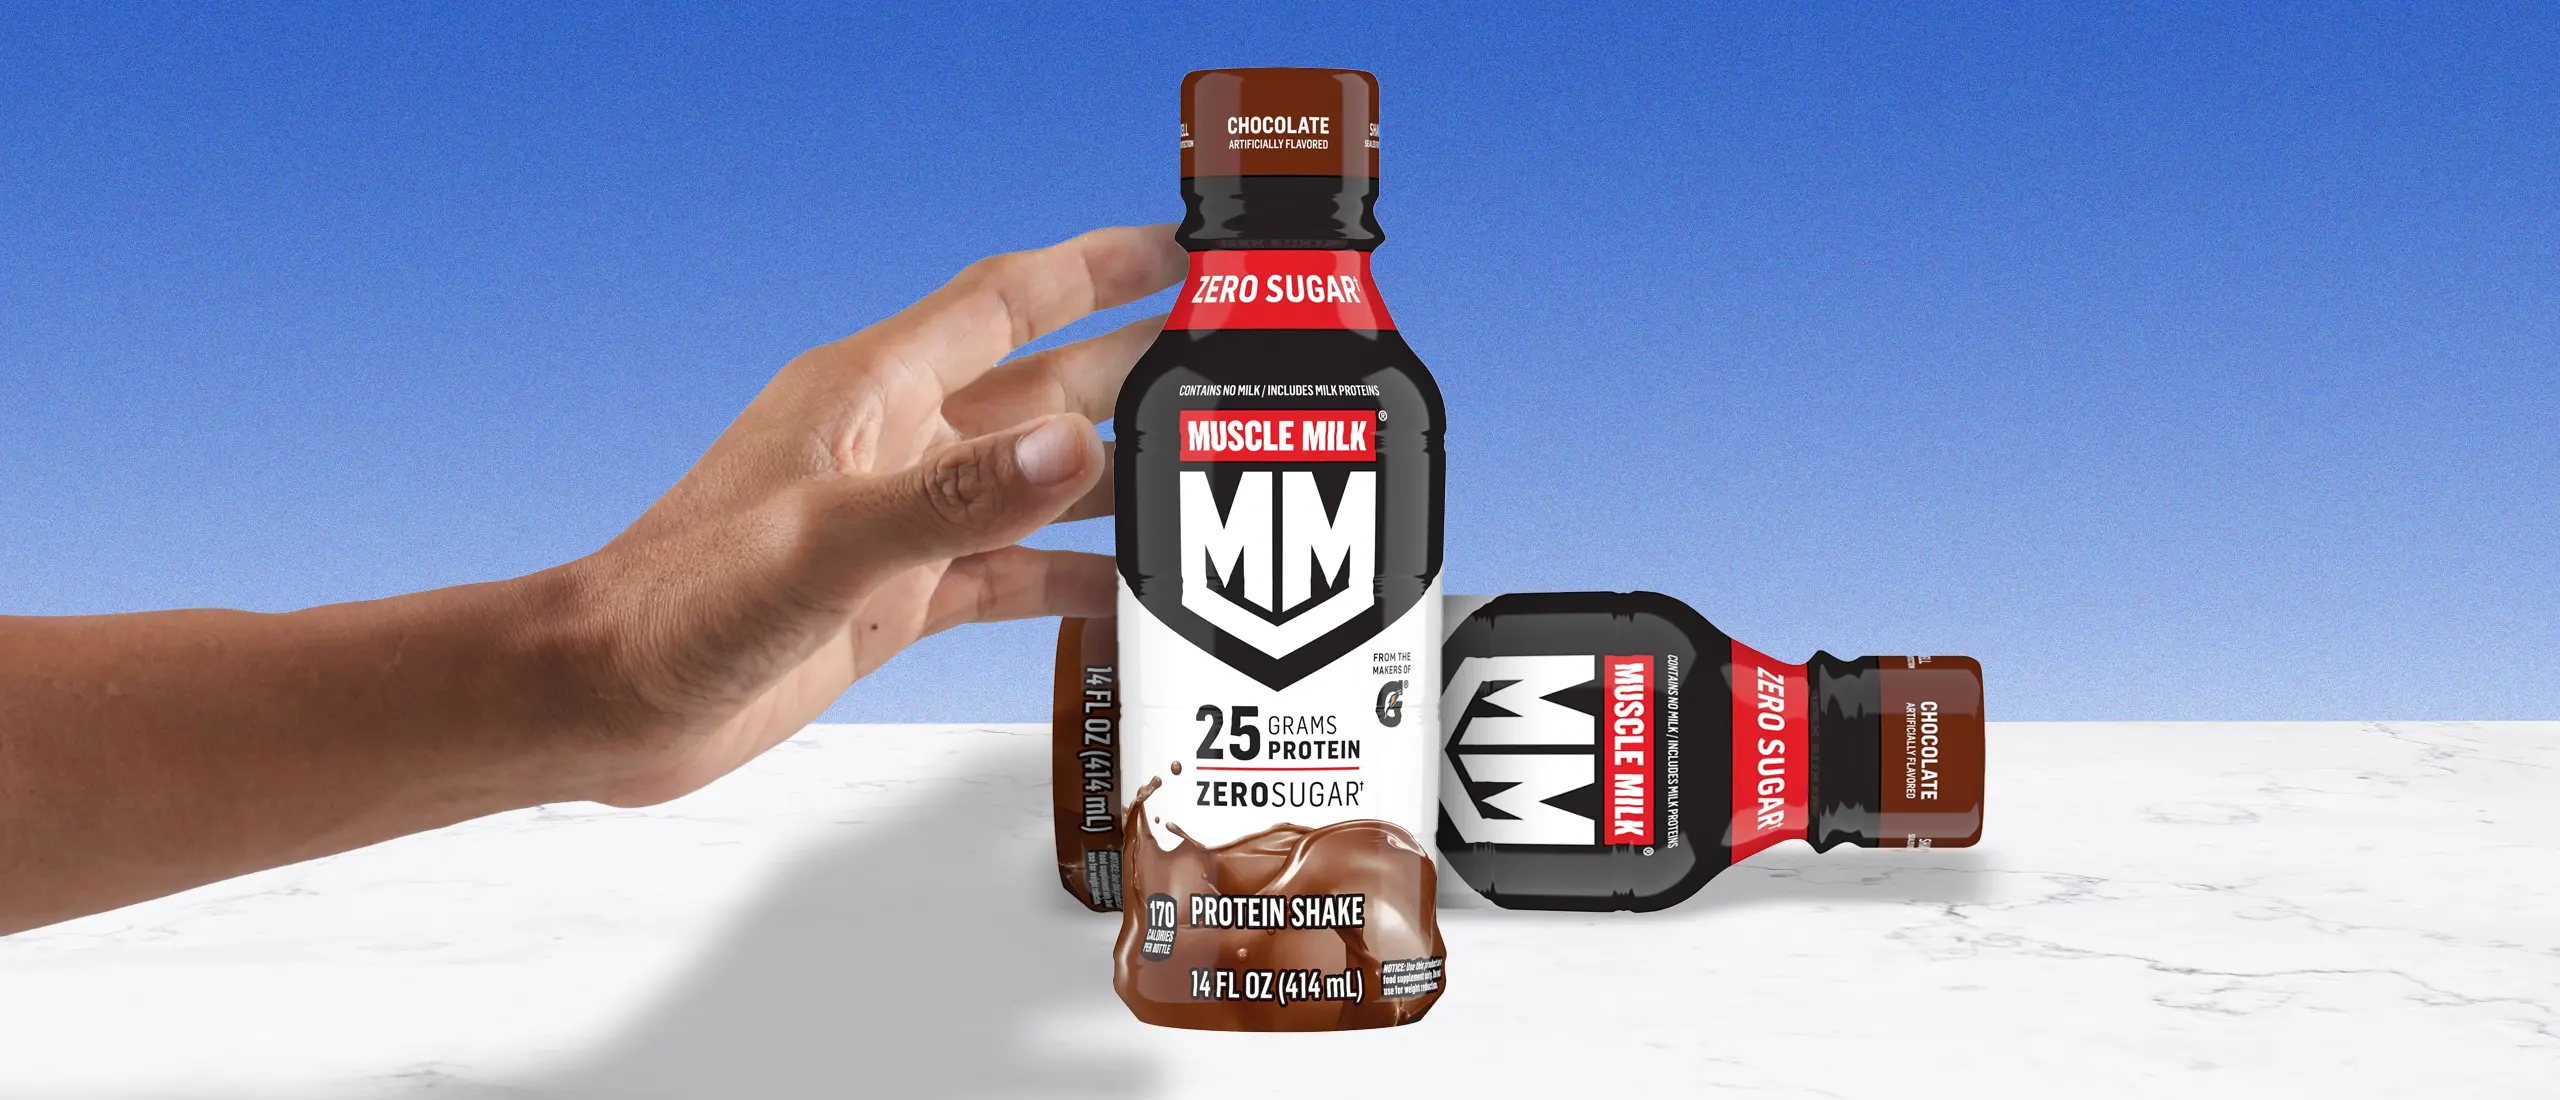 A hand reaching for a bottle of Muscle Milk